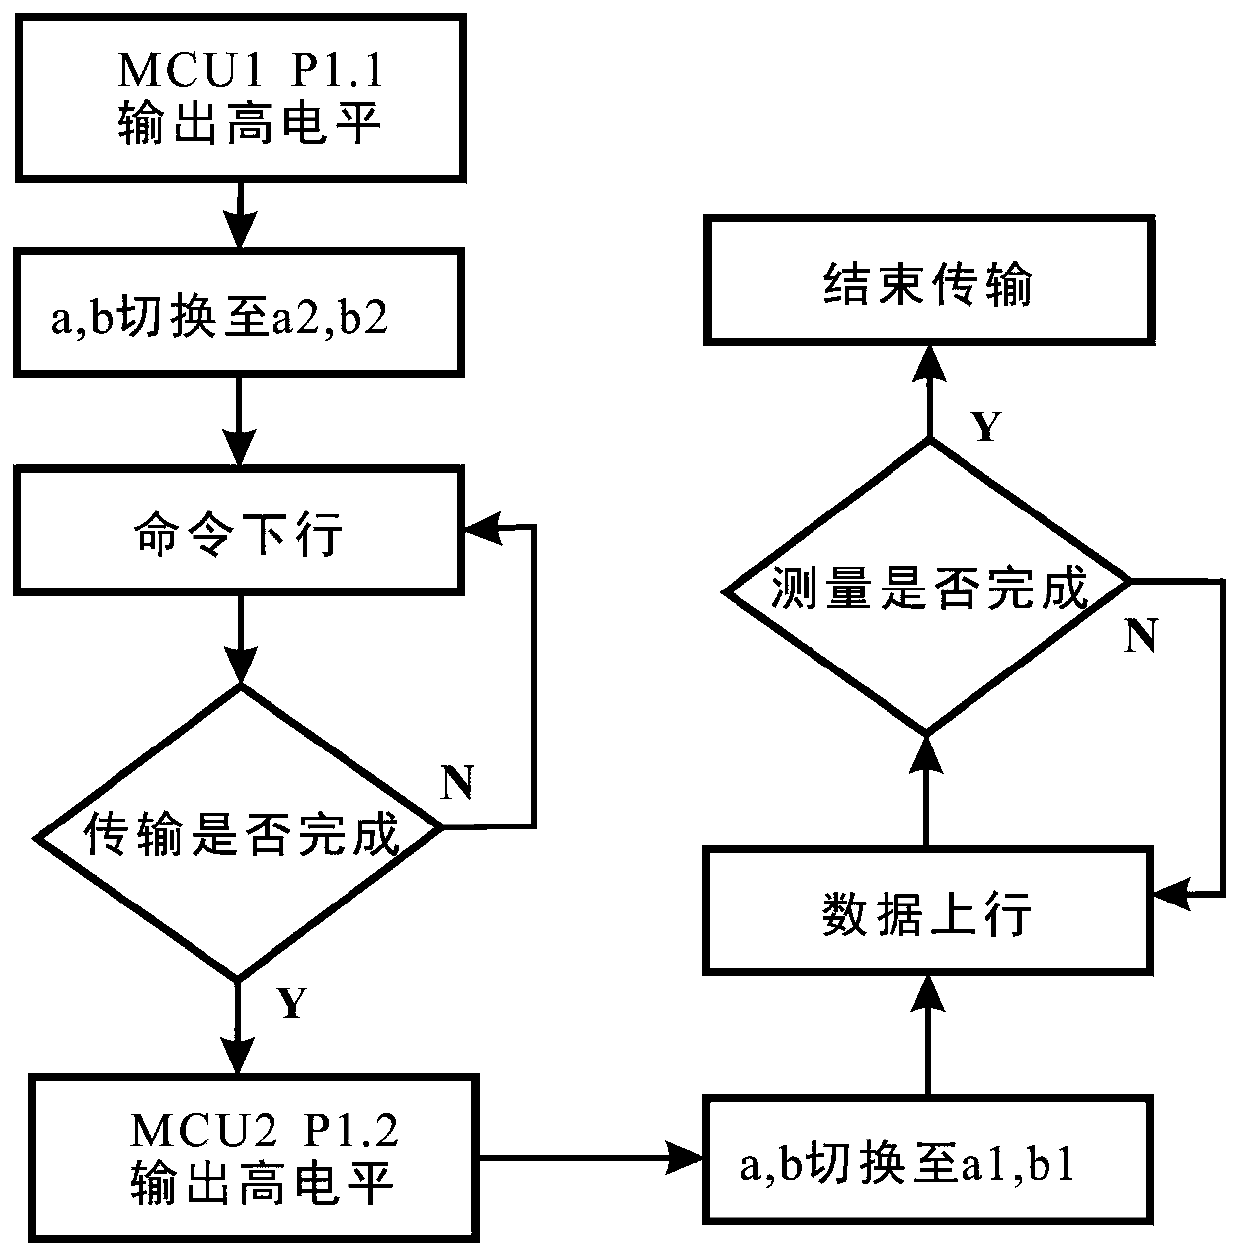 An XCTD remote command and data transmission method